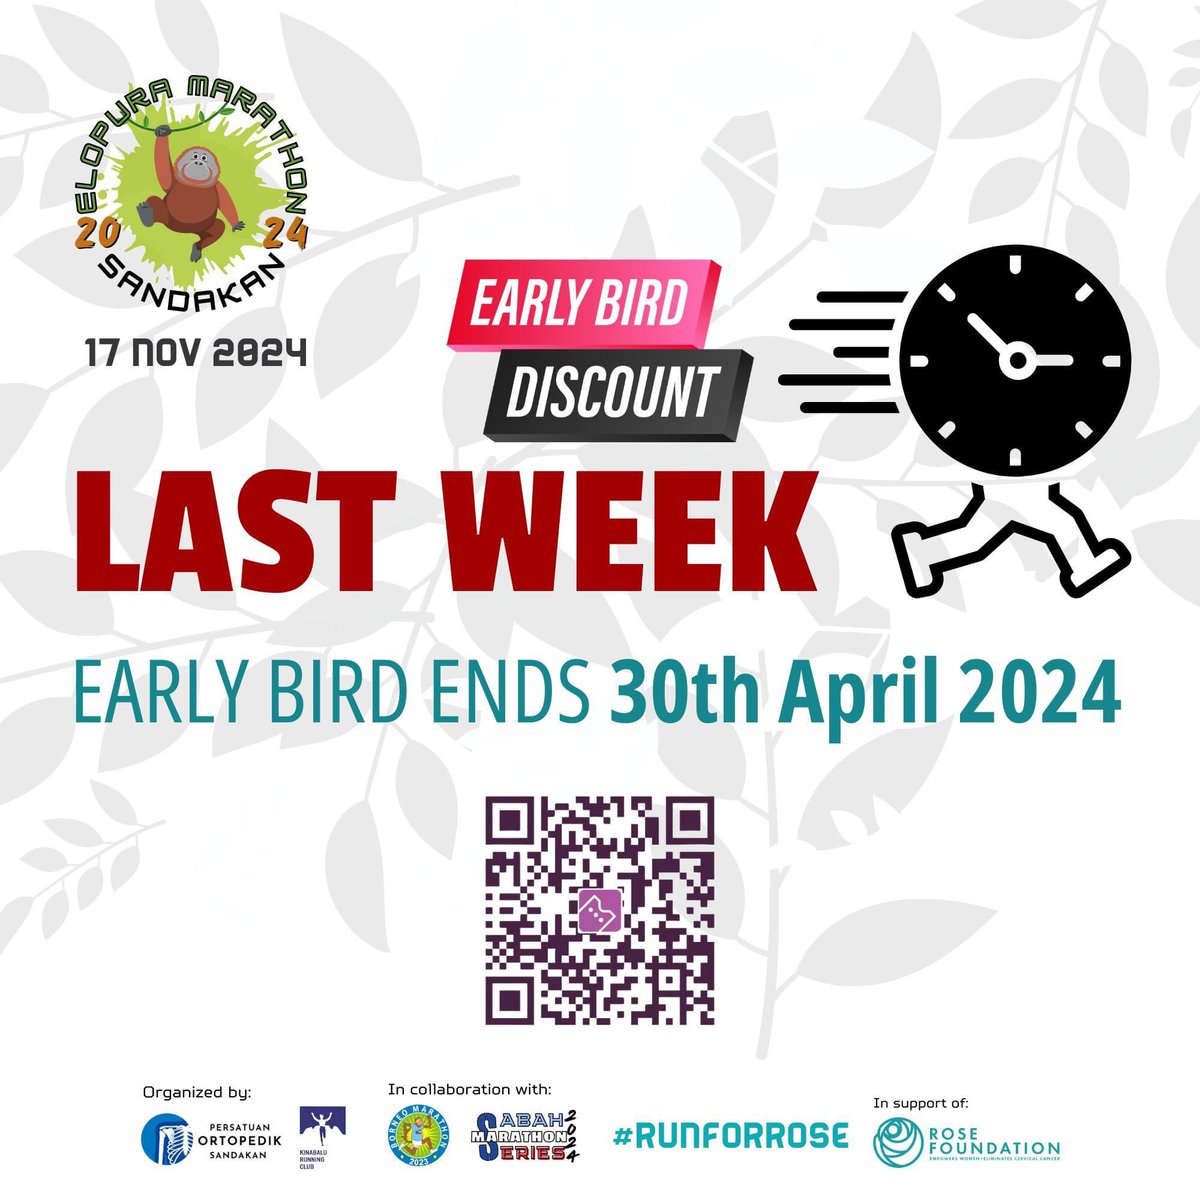 Don't miss out on the chance to join the Elopura Marathon Sandakan 2024! Last 5 days to grab early bird tickets! Run to support #ProgramROSE - a non-profit that aims to end cervical cancer in Malaysia. ​Register now!

#RUNFORROSE
#ElopuraMarathonSandakan​
#CervicalCancerAwareness